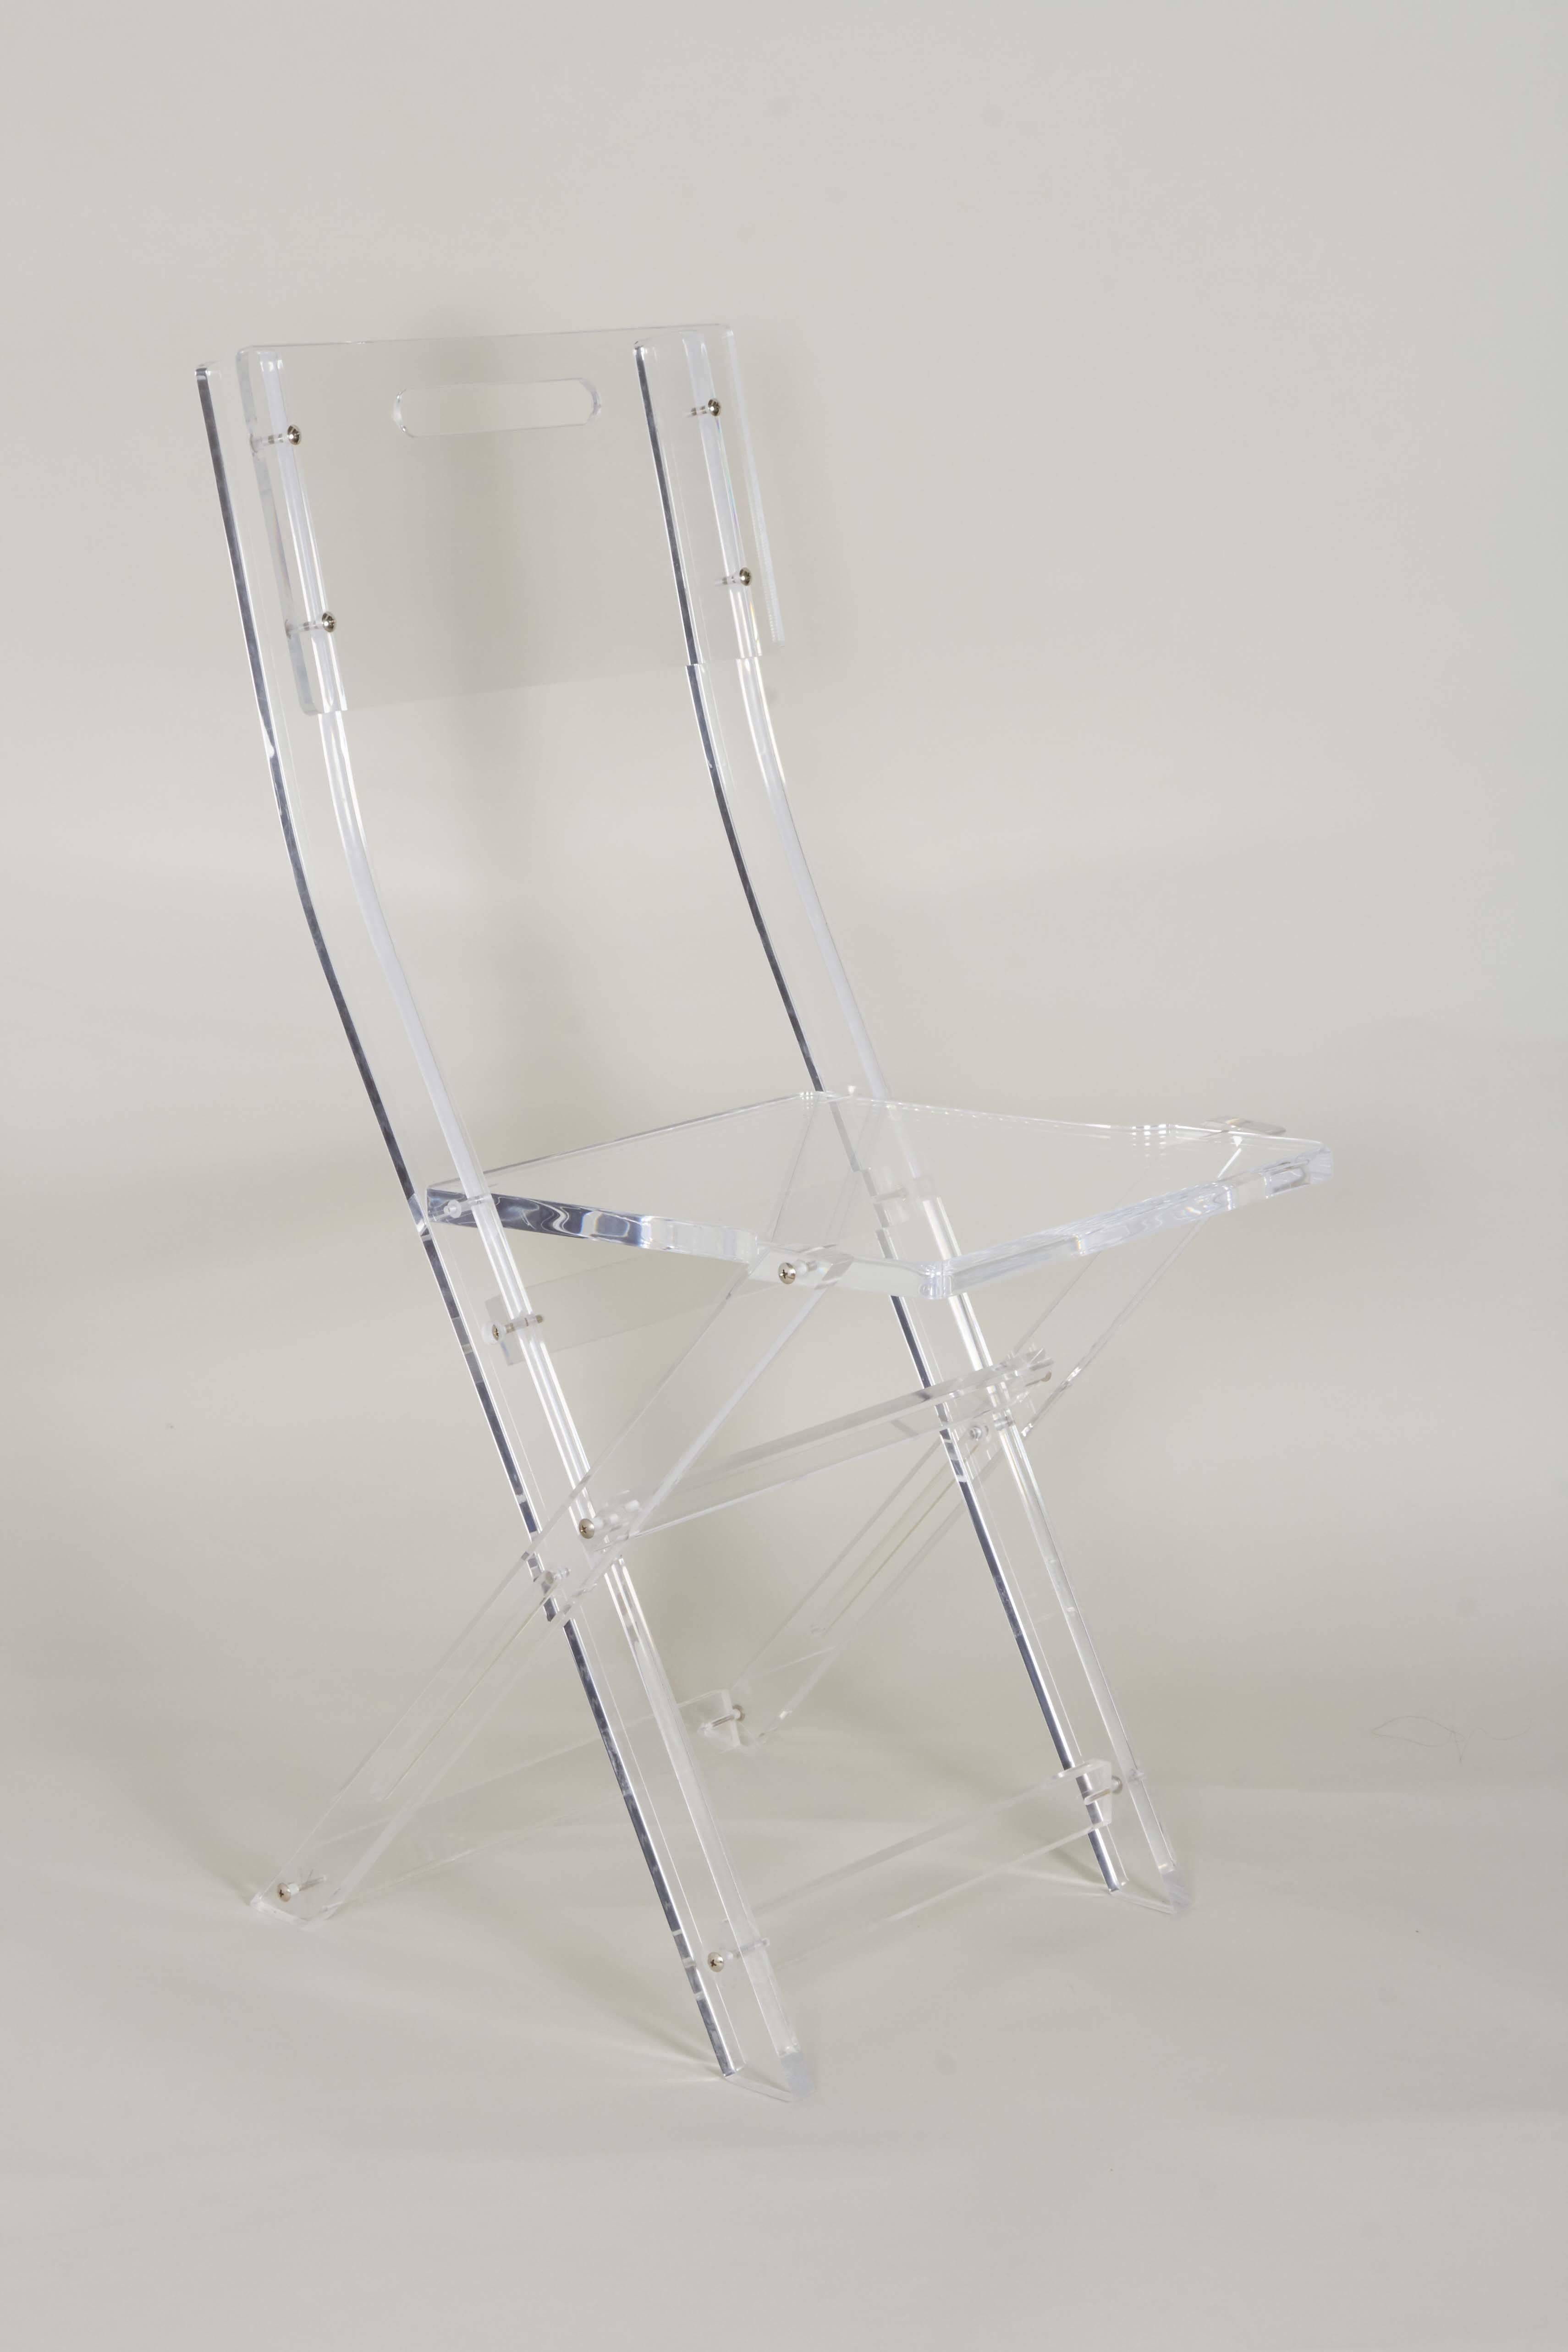 A vintage game table and set of four folding side chairs, manufactured in the United States, circa 1970s, the arrangement entirely in Lucite, each chair on Campaign style x-base. Very good vintage condition, consistent with age and prior use.

10899